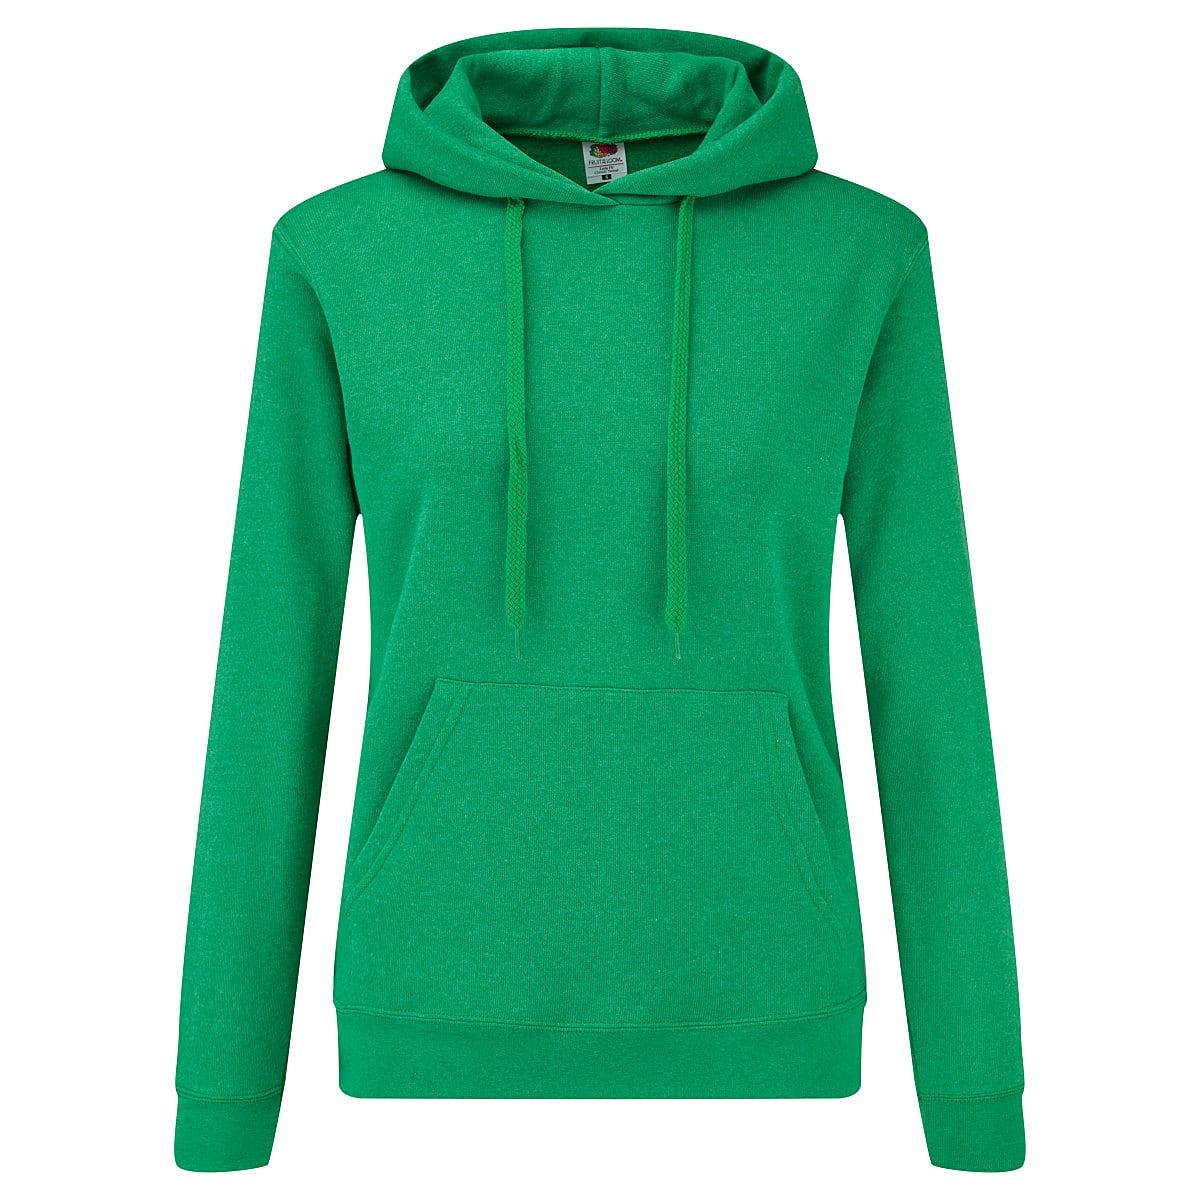 Fruit Of The Loom Lady-Fit Classic Hoodie in Retro Heather Green (Product Code: 62038)